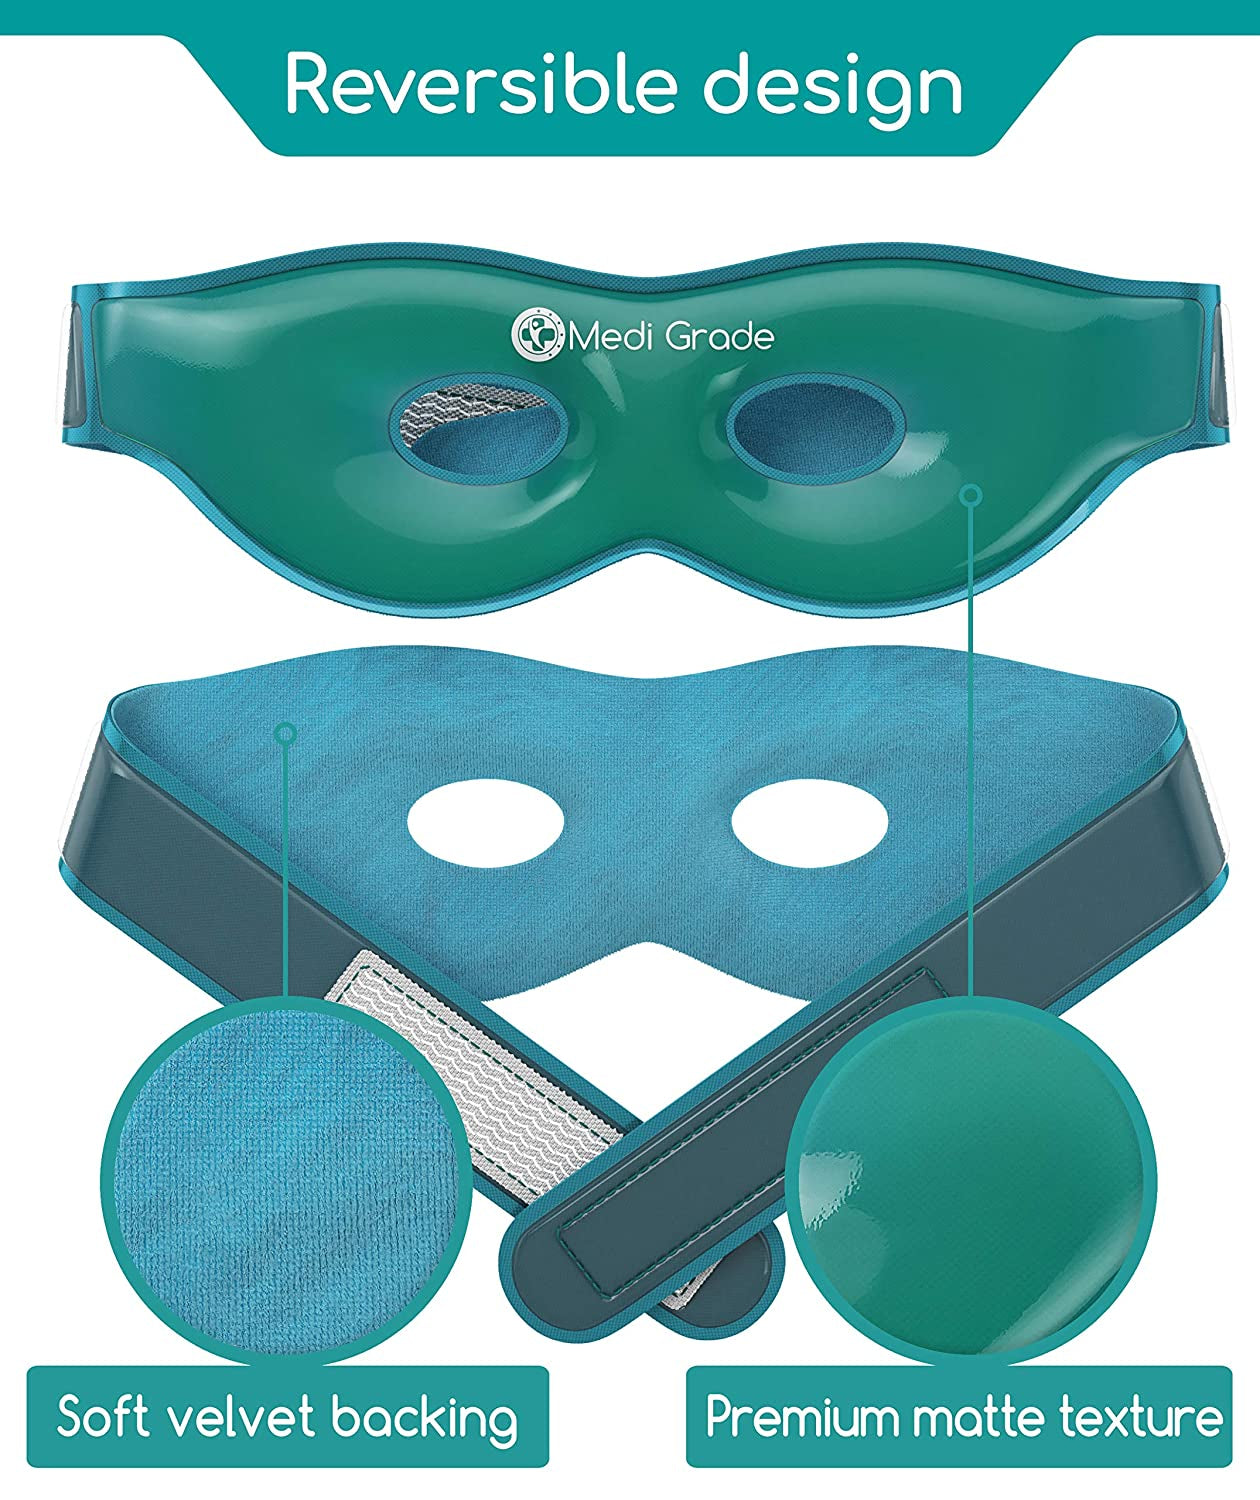 Medi Grade Cooling Face Mask and Cold Eye Mask - Safe Gel Technology Complete Eye, under Eye and Face Ice Pack Set - Soothing Cold Face and Eye Masks for Dark Circles and Puffiness - Cool Bag Incl.